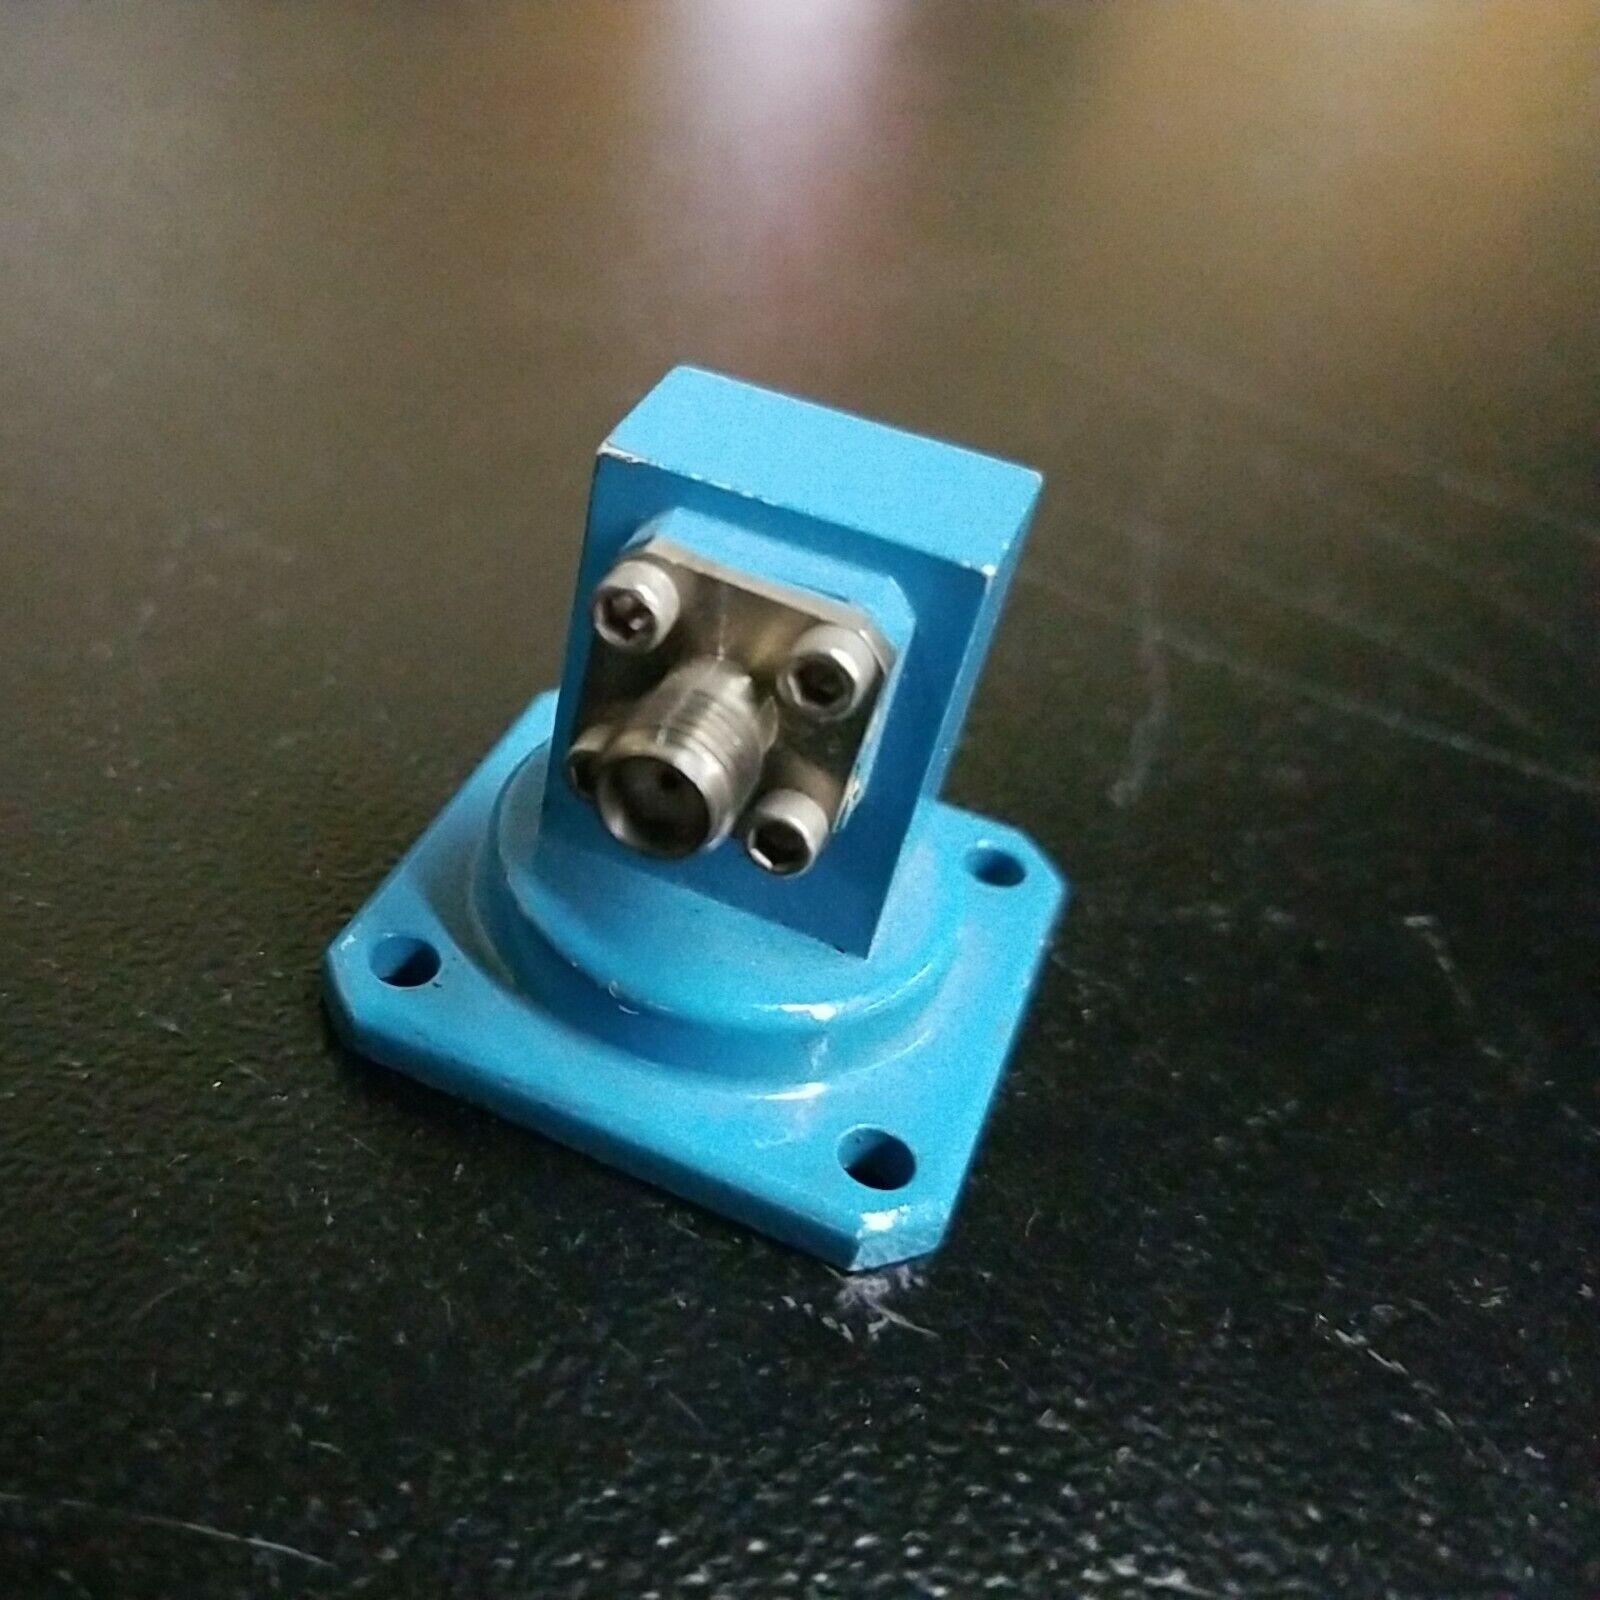 Wr62 To Sma Waveguide Adapter, 12.40 - 18 Ghz